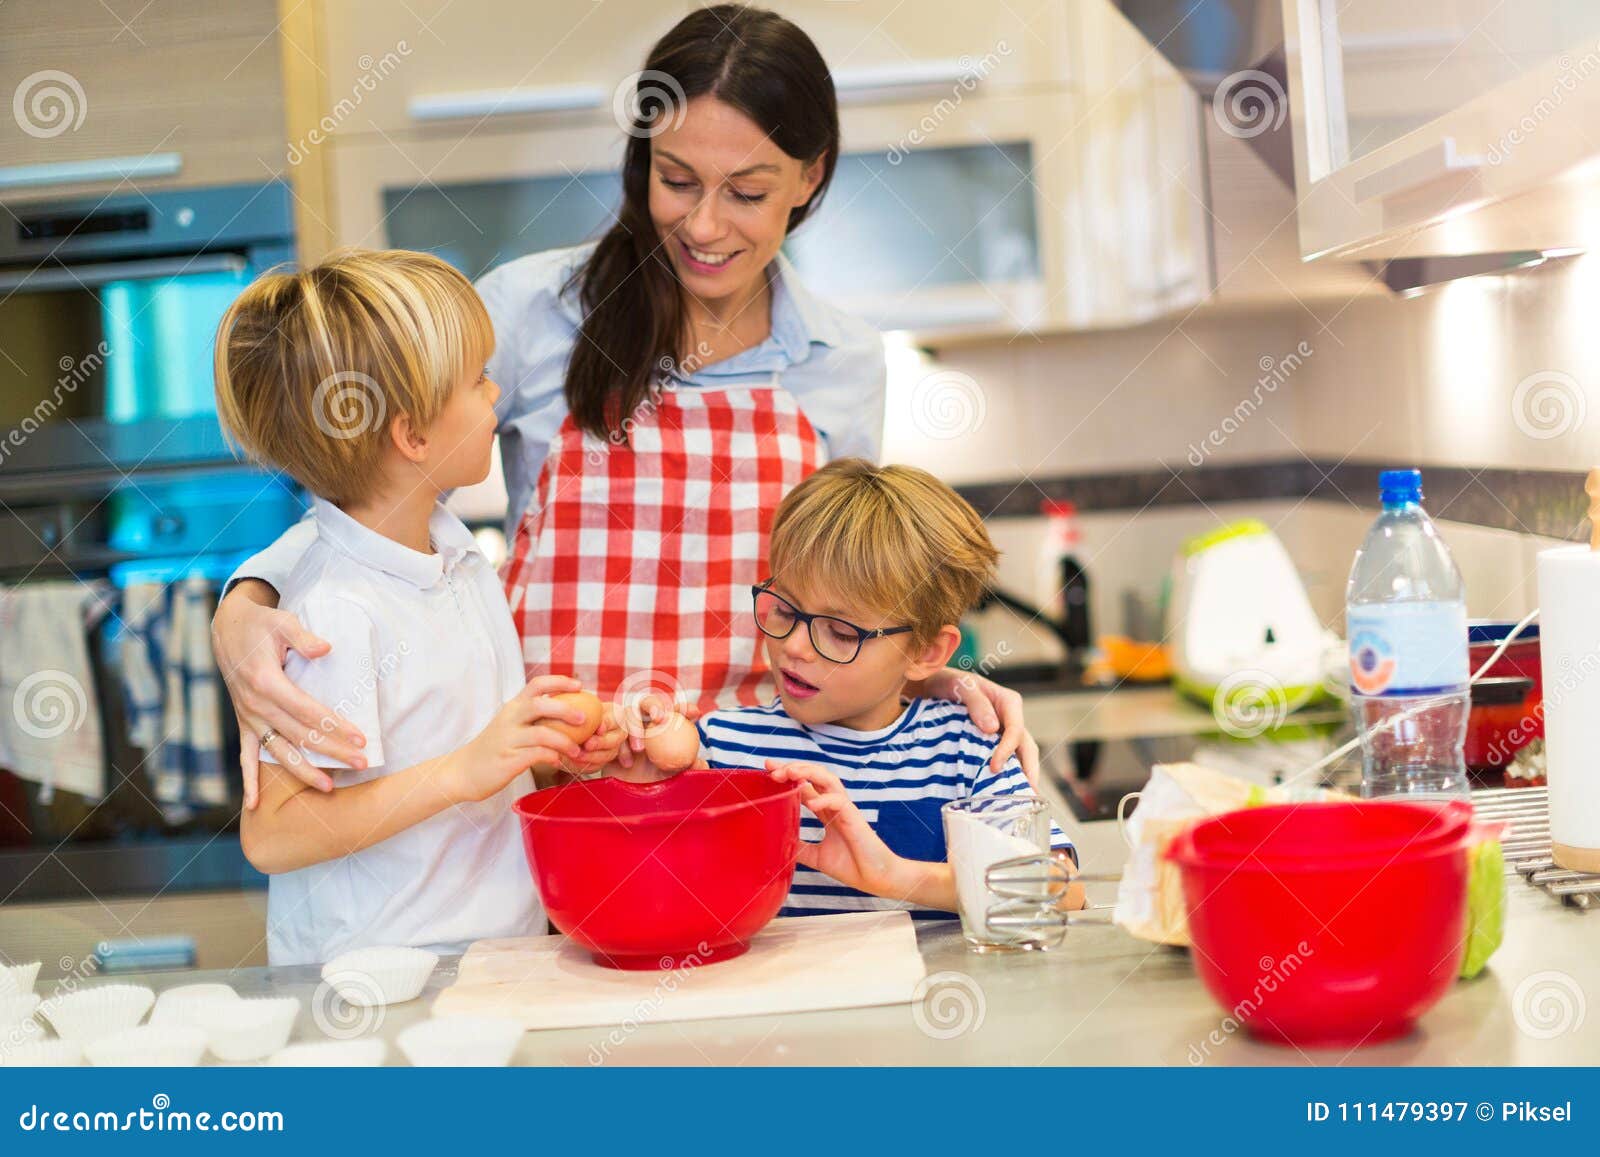 Mother and Children Baking Together Stock Image - Image of cheerful